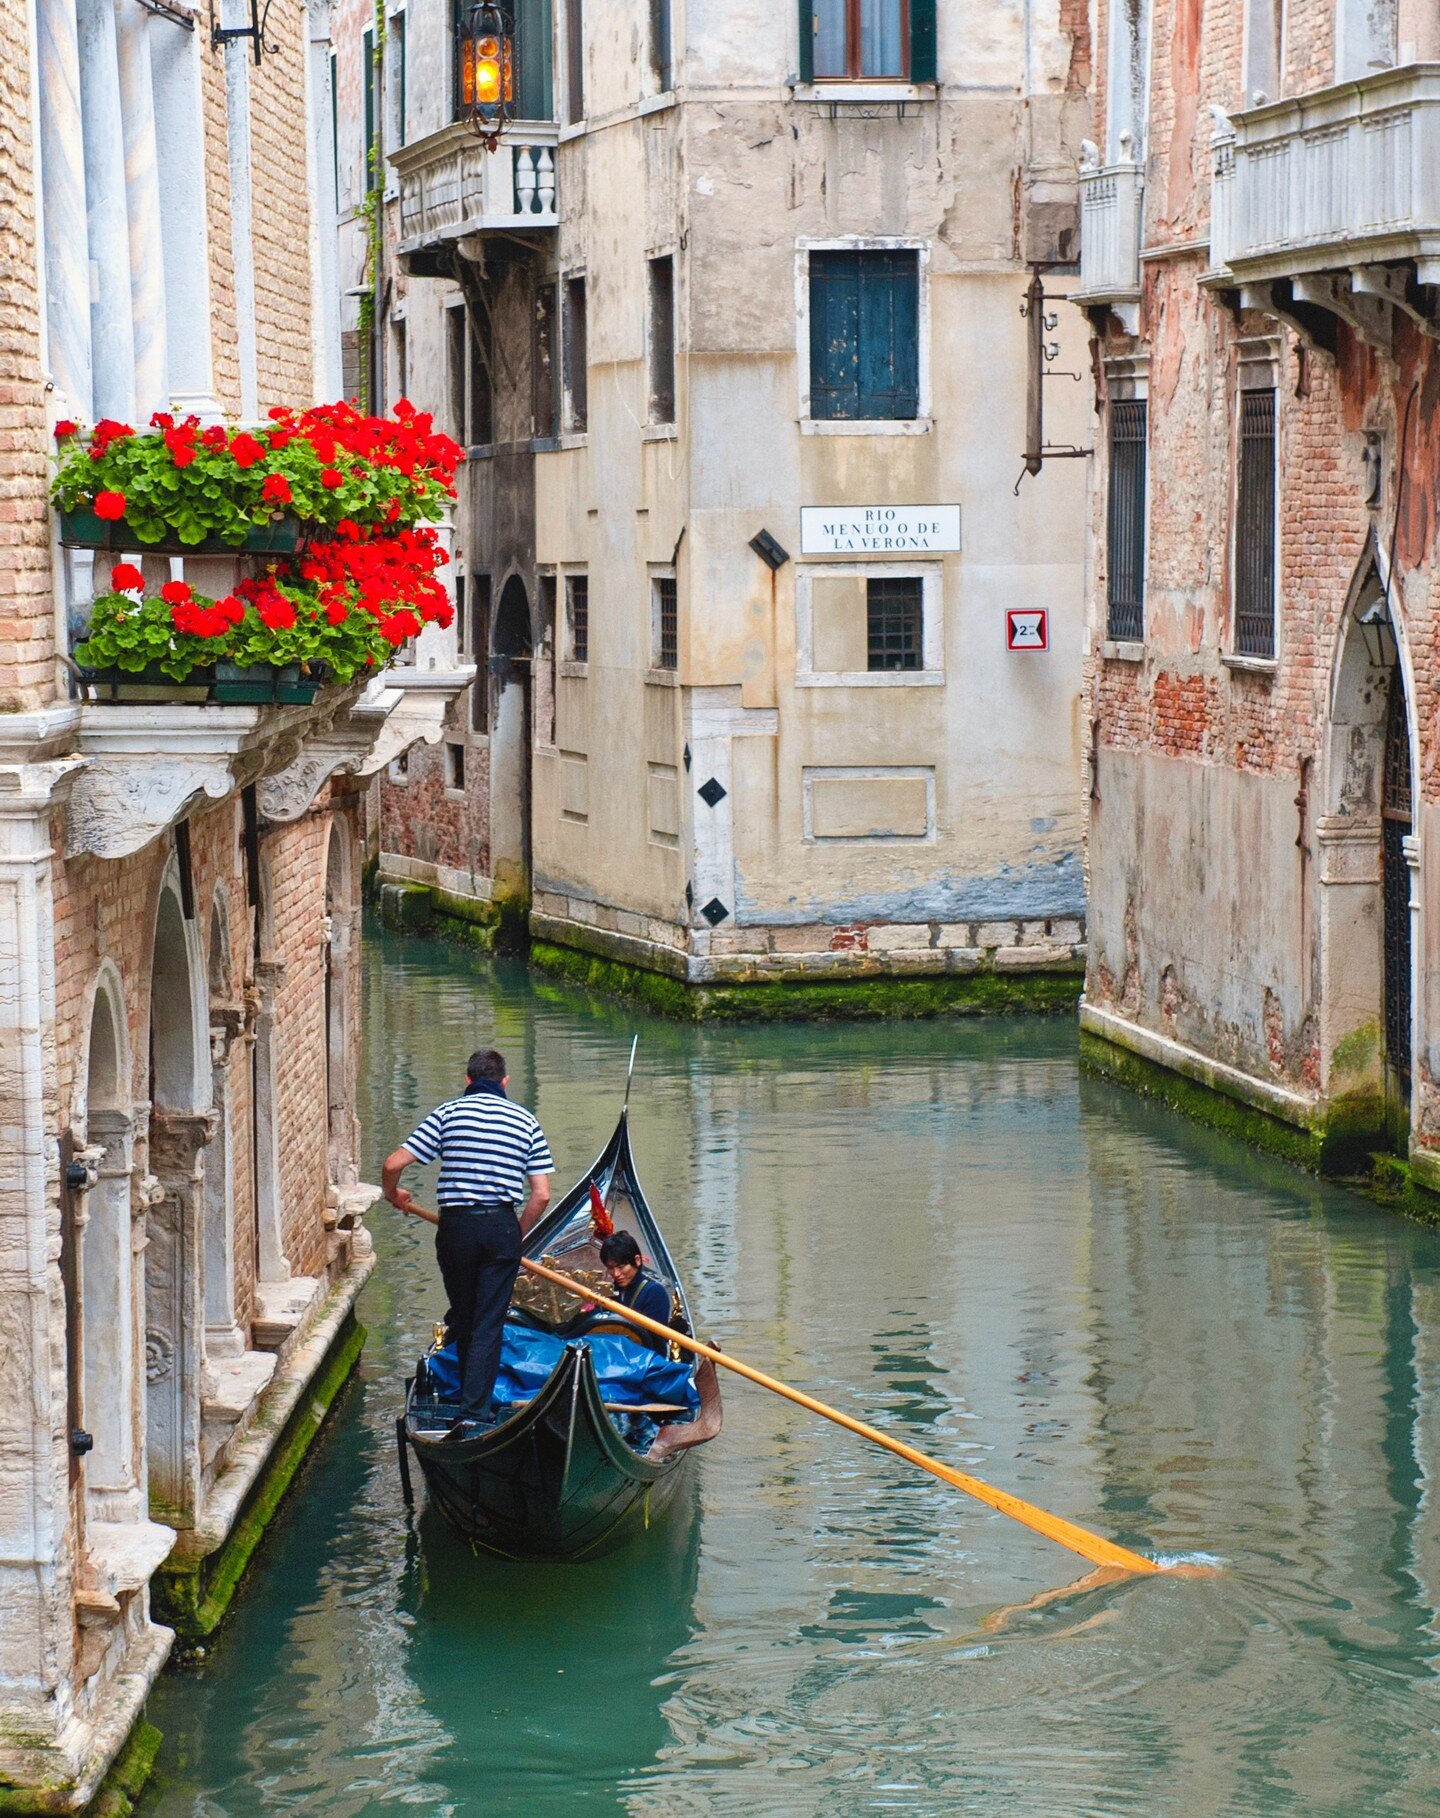 Gliding through the serene canals of Venice, every turn is a live painting. Join our workshops to capture the soul of the city with your lens. 📷✨ 
Check https://www.msecchi.com/

#VenicePhotography #CaptureLaSerenissima&quot;

#VeniceWorkshop #Trave